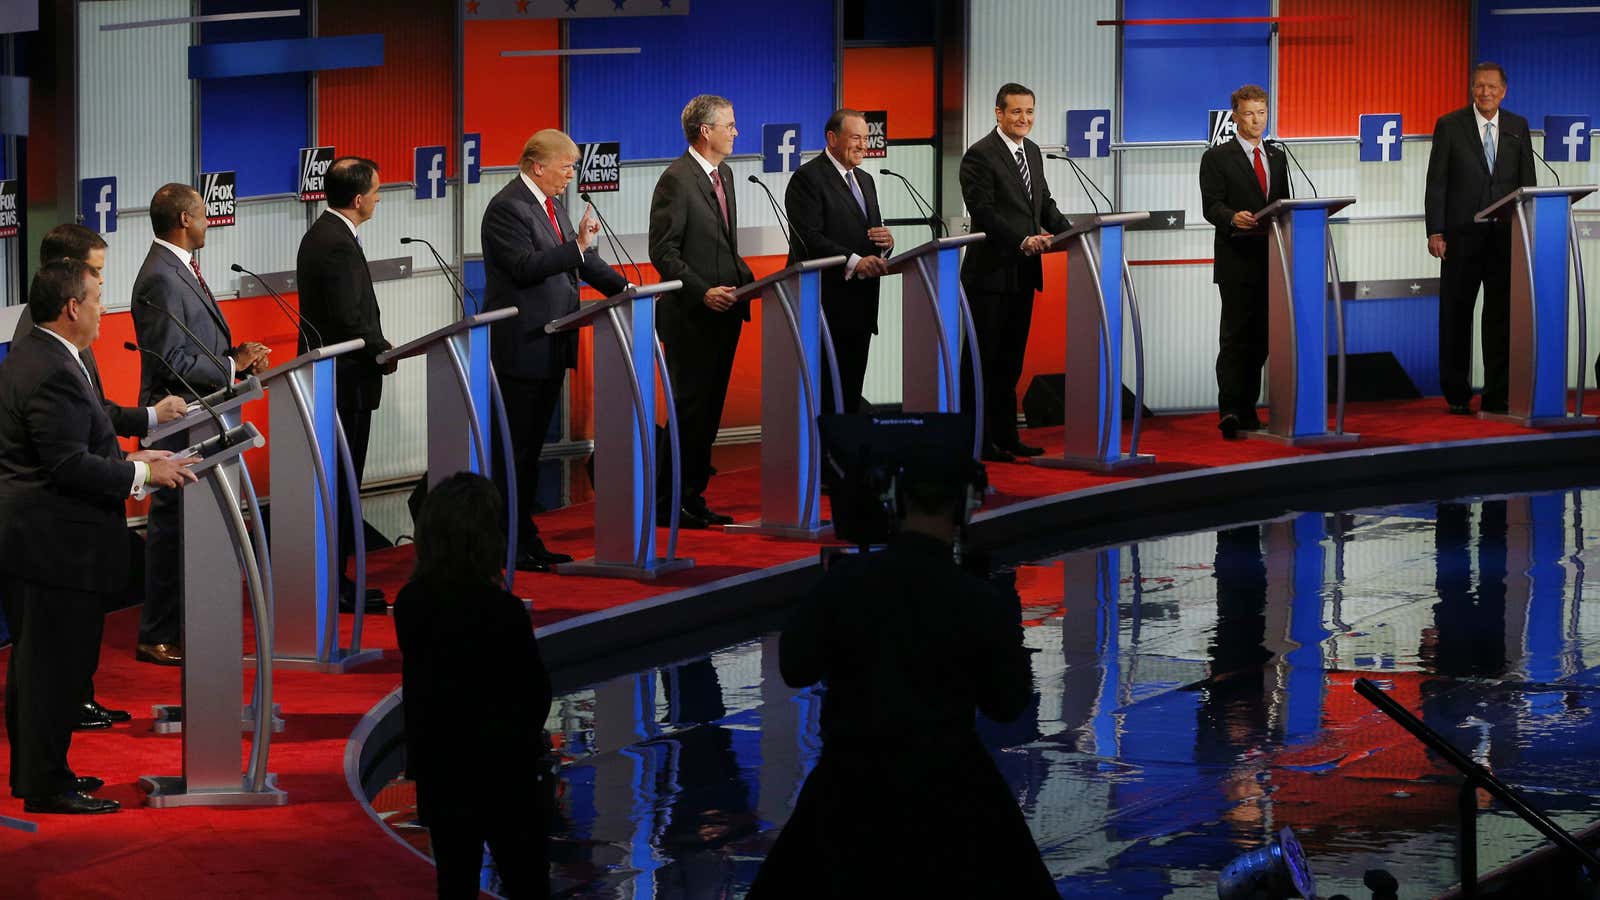 Who’s missing from this debate? Deez Nuts.